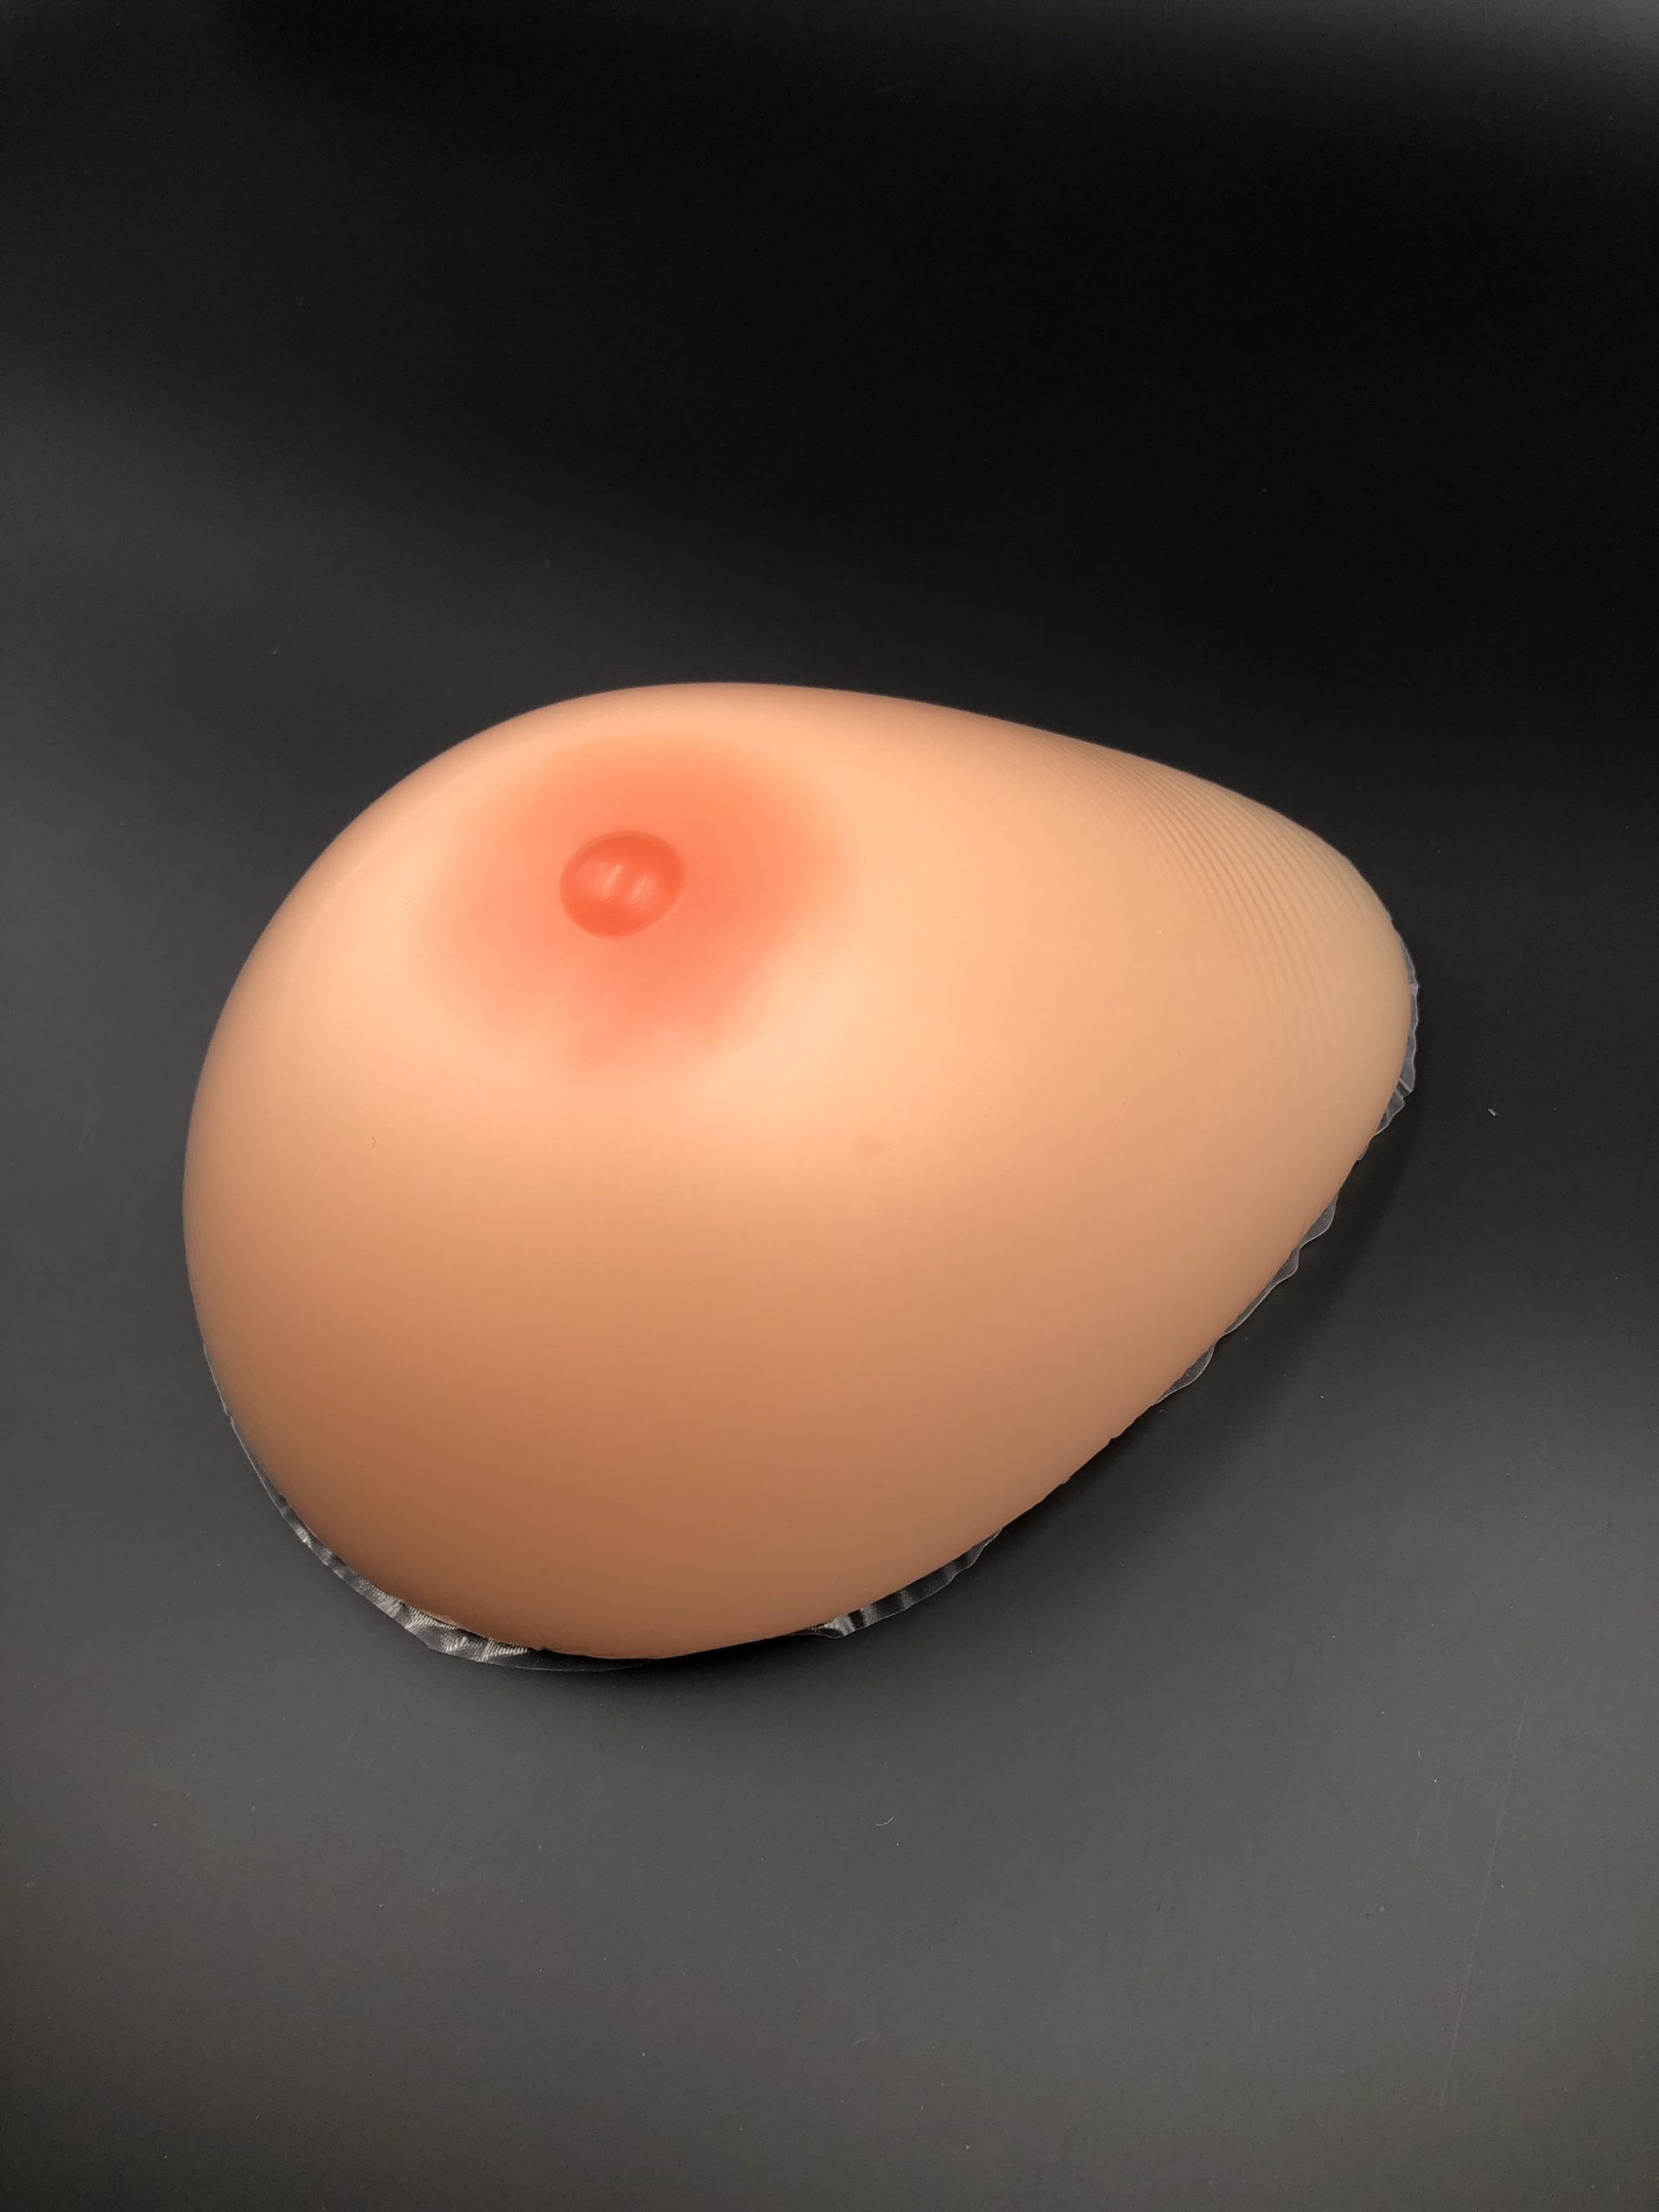 Where To Buy Silicone Breast Forms